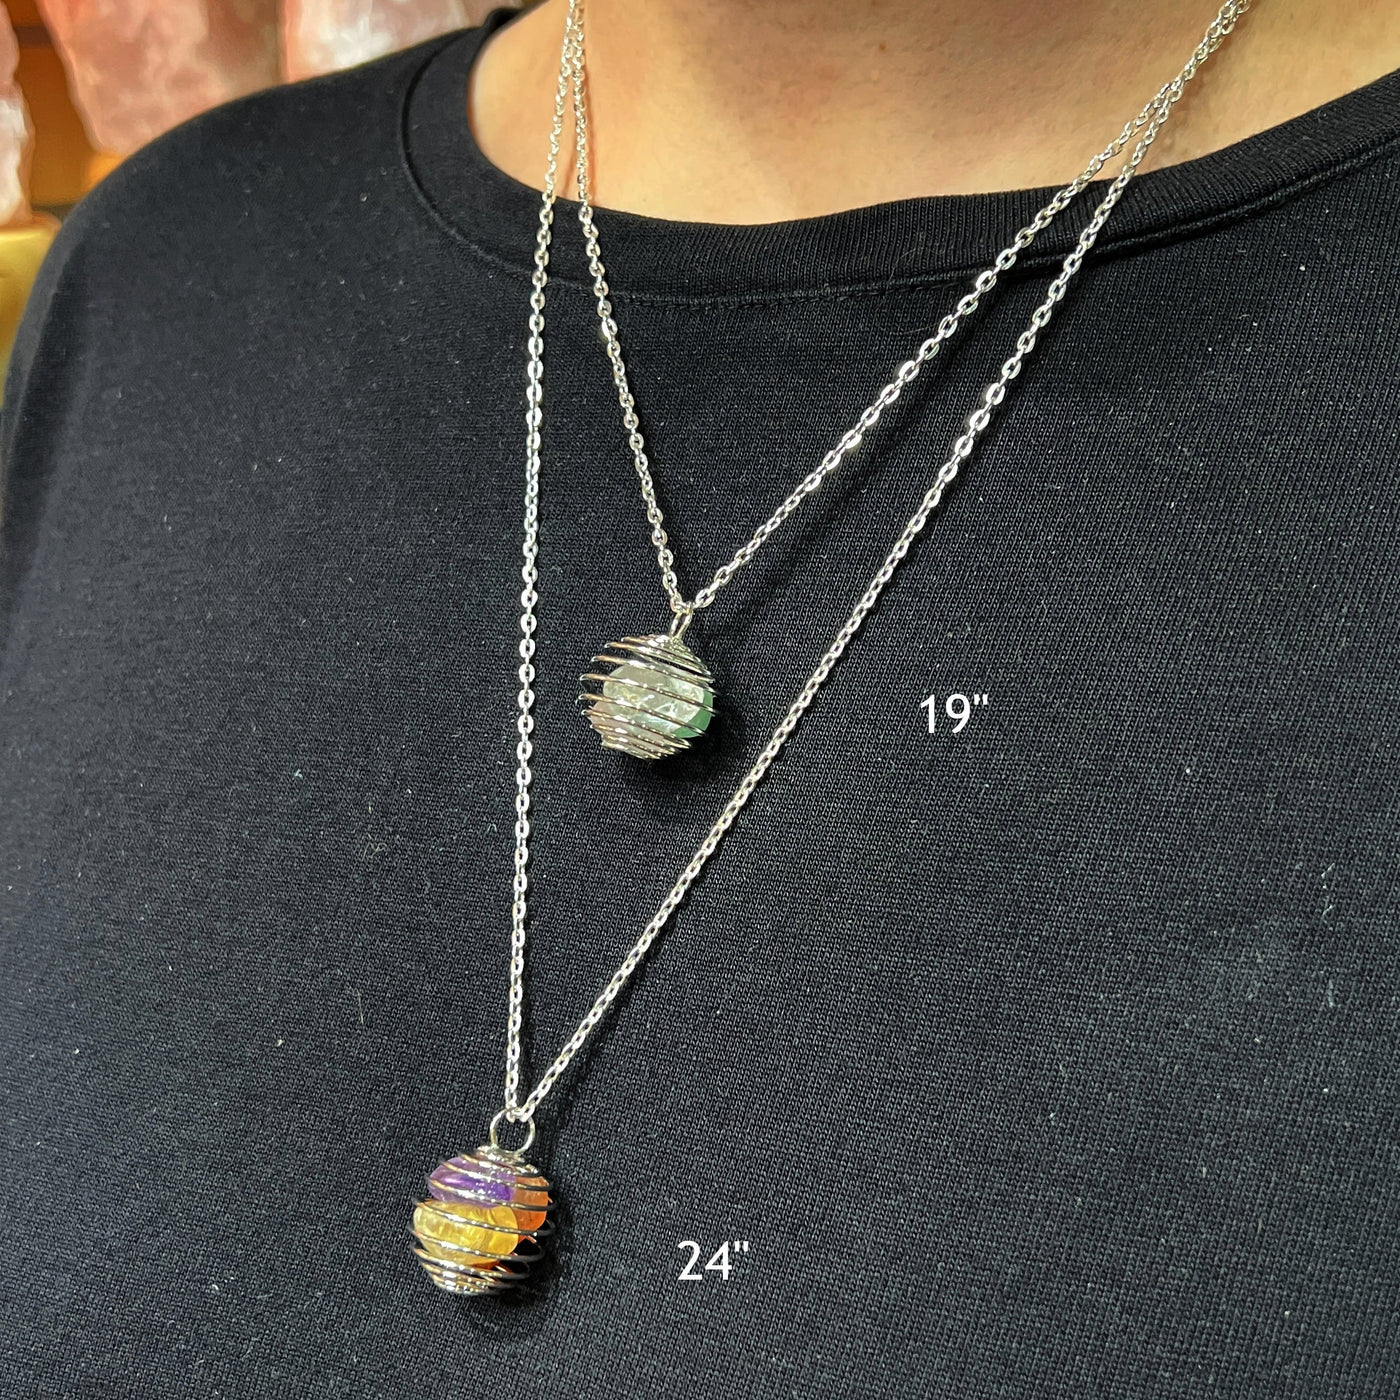 Build Your Own Chakra Healing Necklace Kit